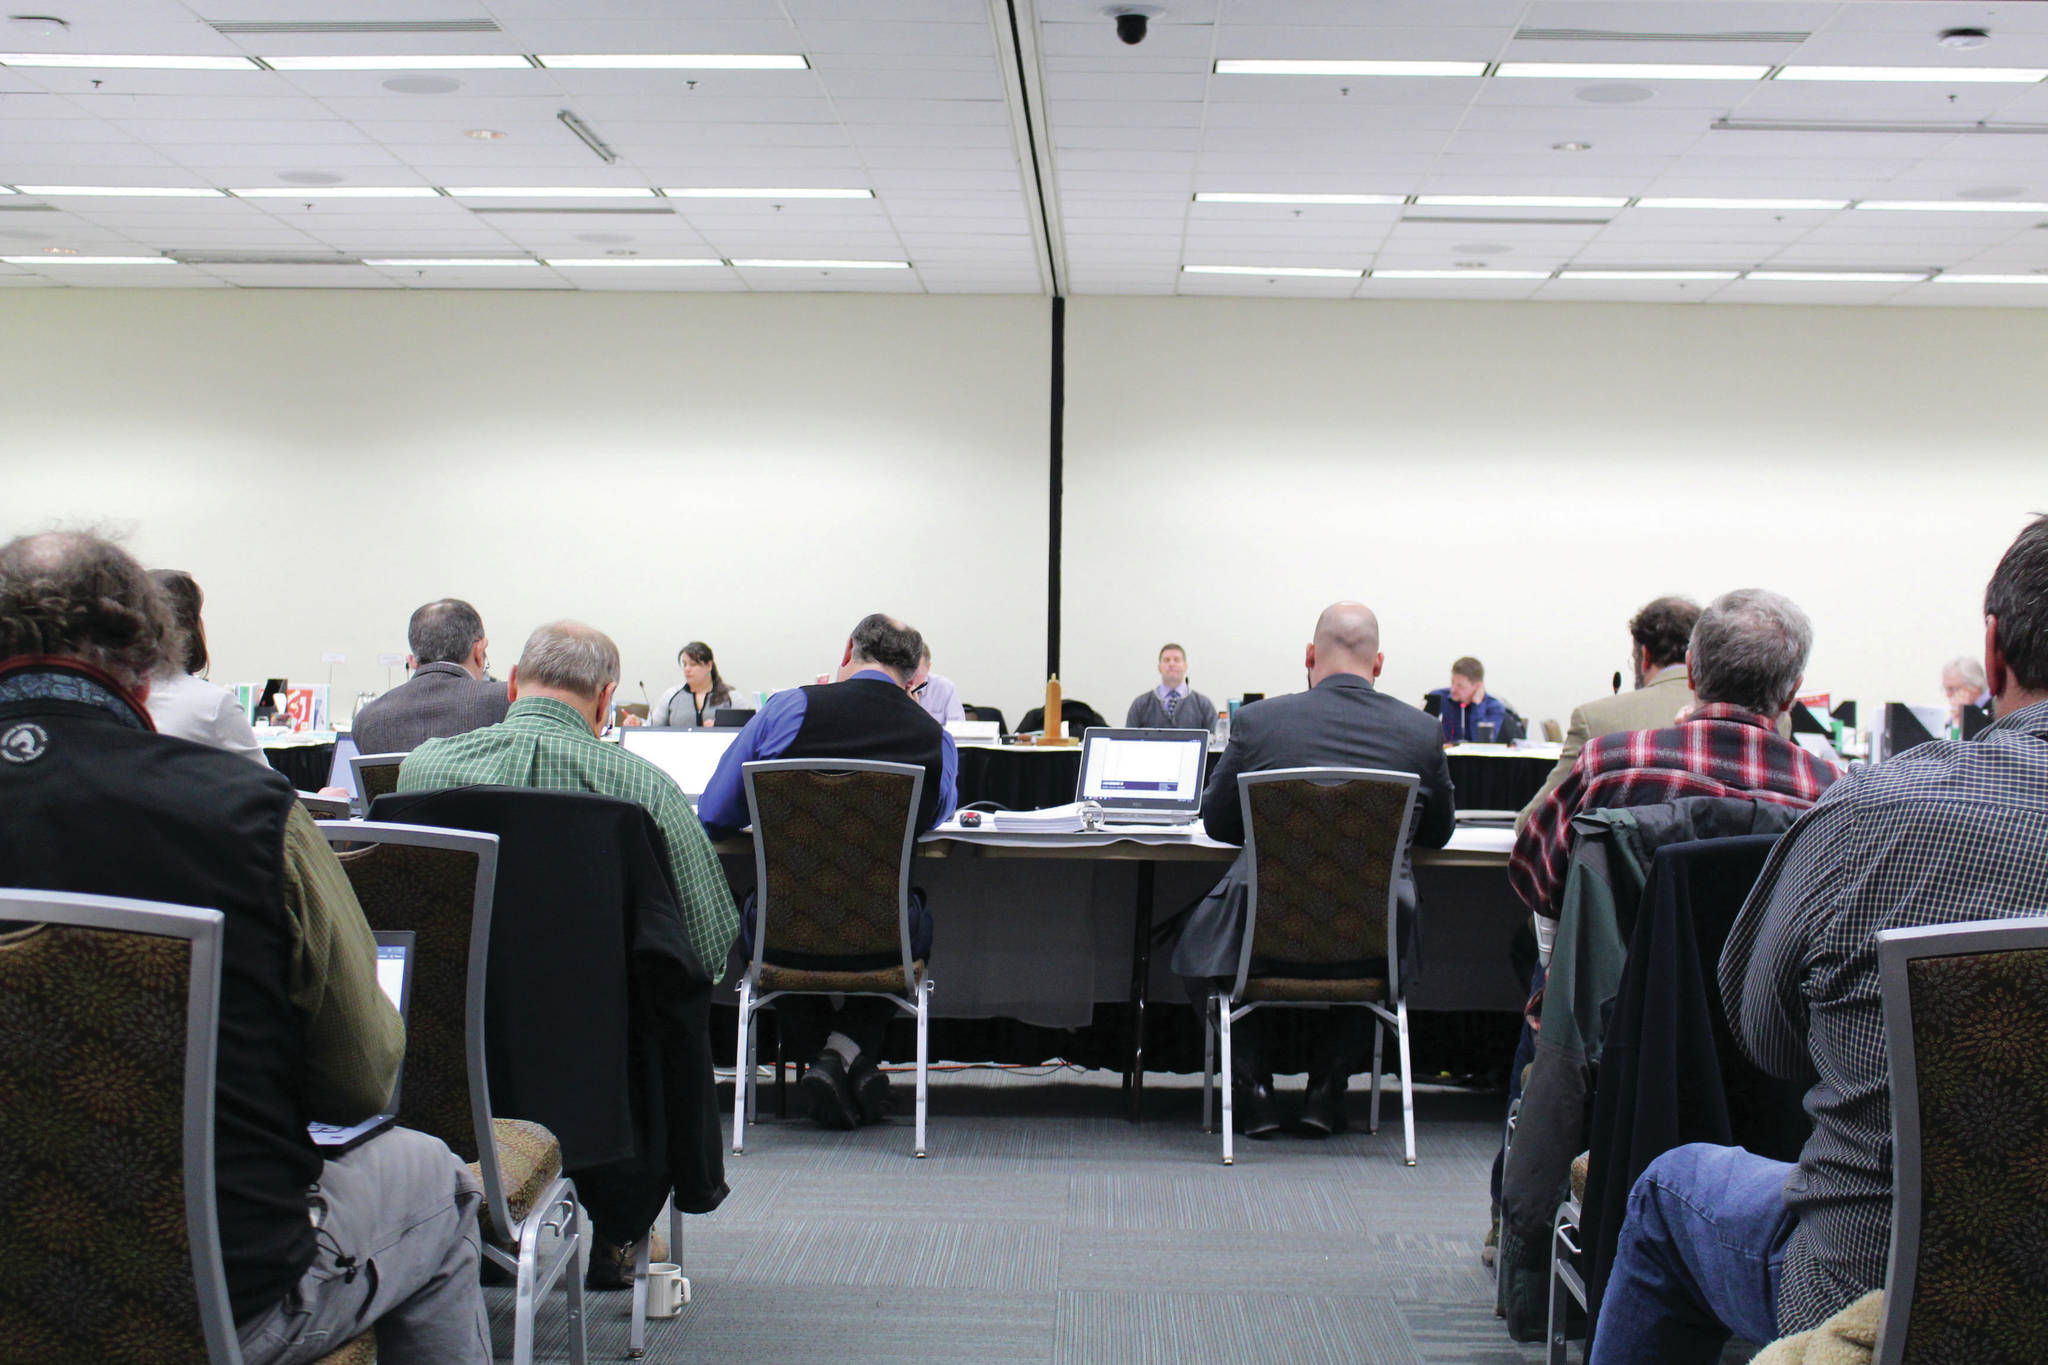 Members of the Alaska Board of Fisheries meet for the Upper Cook Inlet Finfish Meeting at the William A. Egan Convention Center in Anchorage, Alaska, on Feb. 11, 2020. (Photo by Brian Mazurek/Peninsula Clarion)